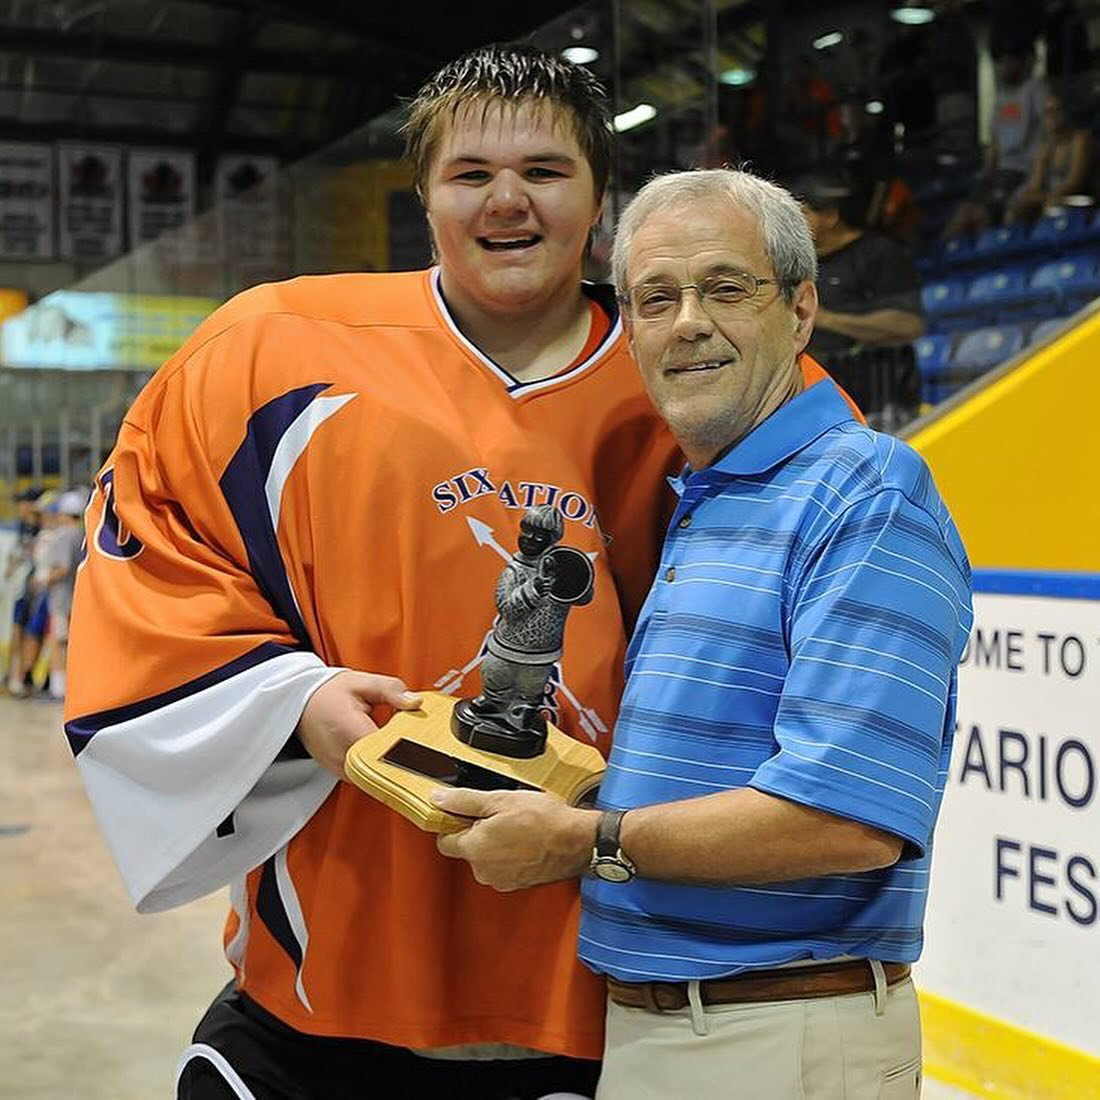 In 2014, Doug Jamieson won his first Minto Cup. A decade later, will he do the same in the NLL? 
&nbsp;
Our annual NLL GOTY breakdown and NLL Finals Preview hits TheLaxMag.com next week.

📷 Ward Laforme Jr., @fifth_edition_photos